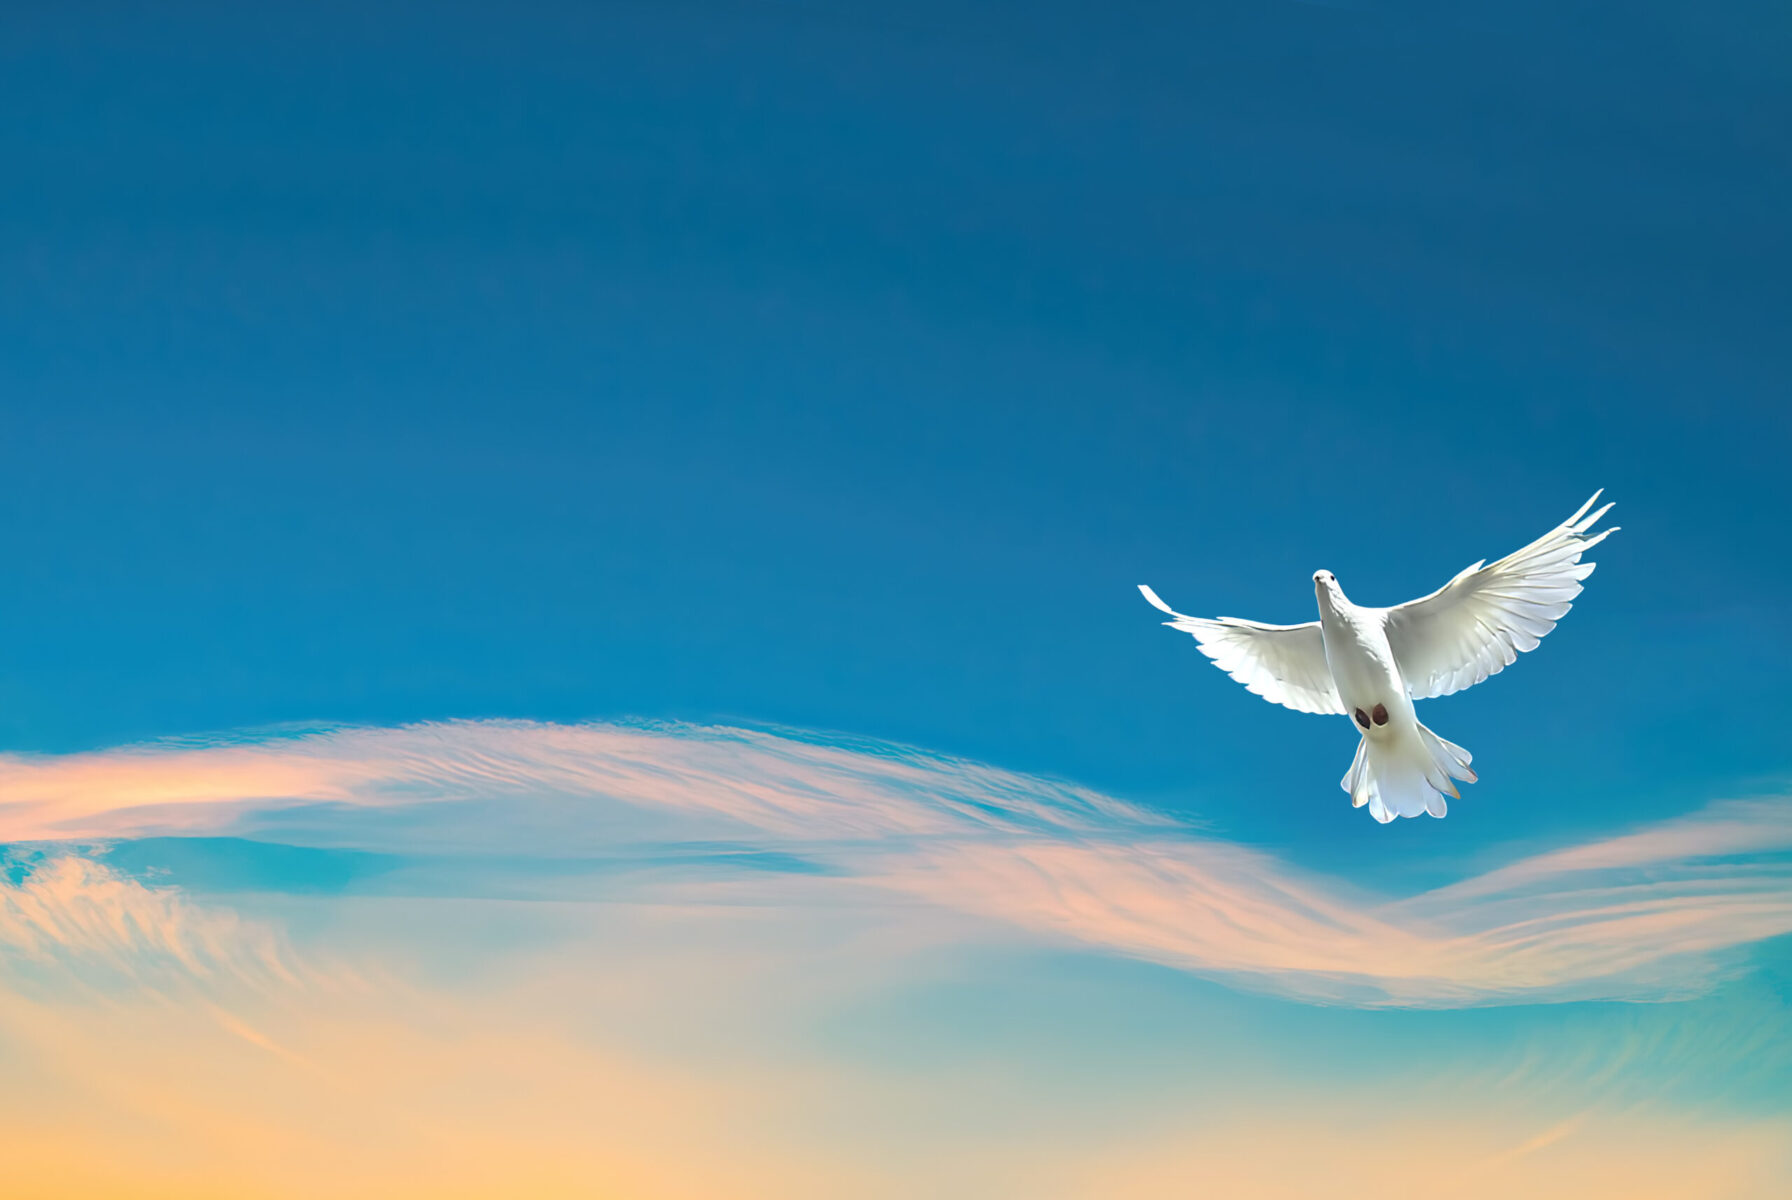 Dove in the air symbol of faith over blue background